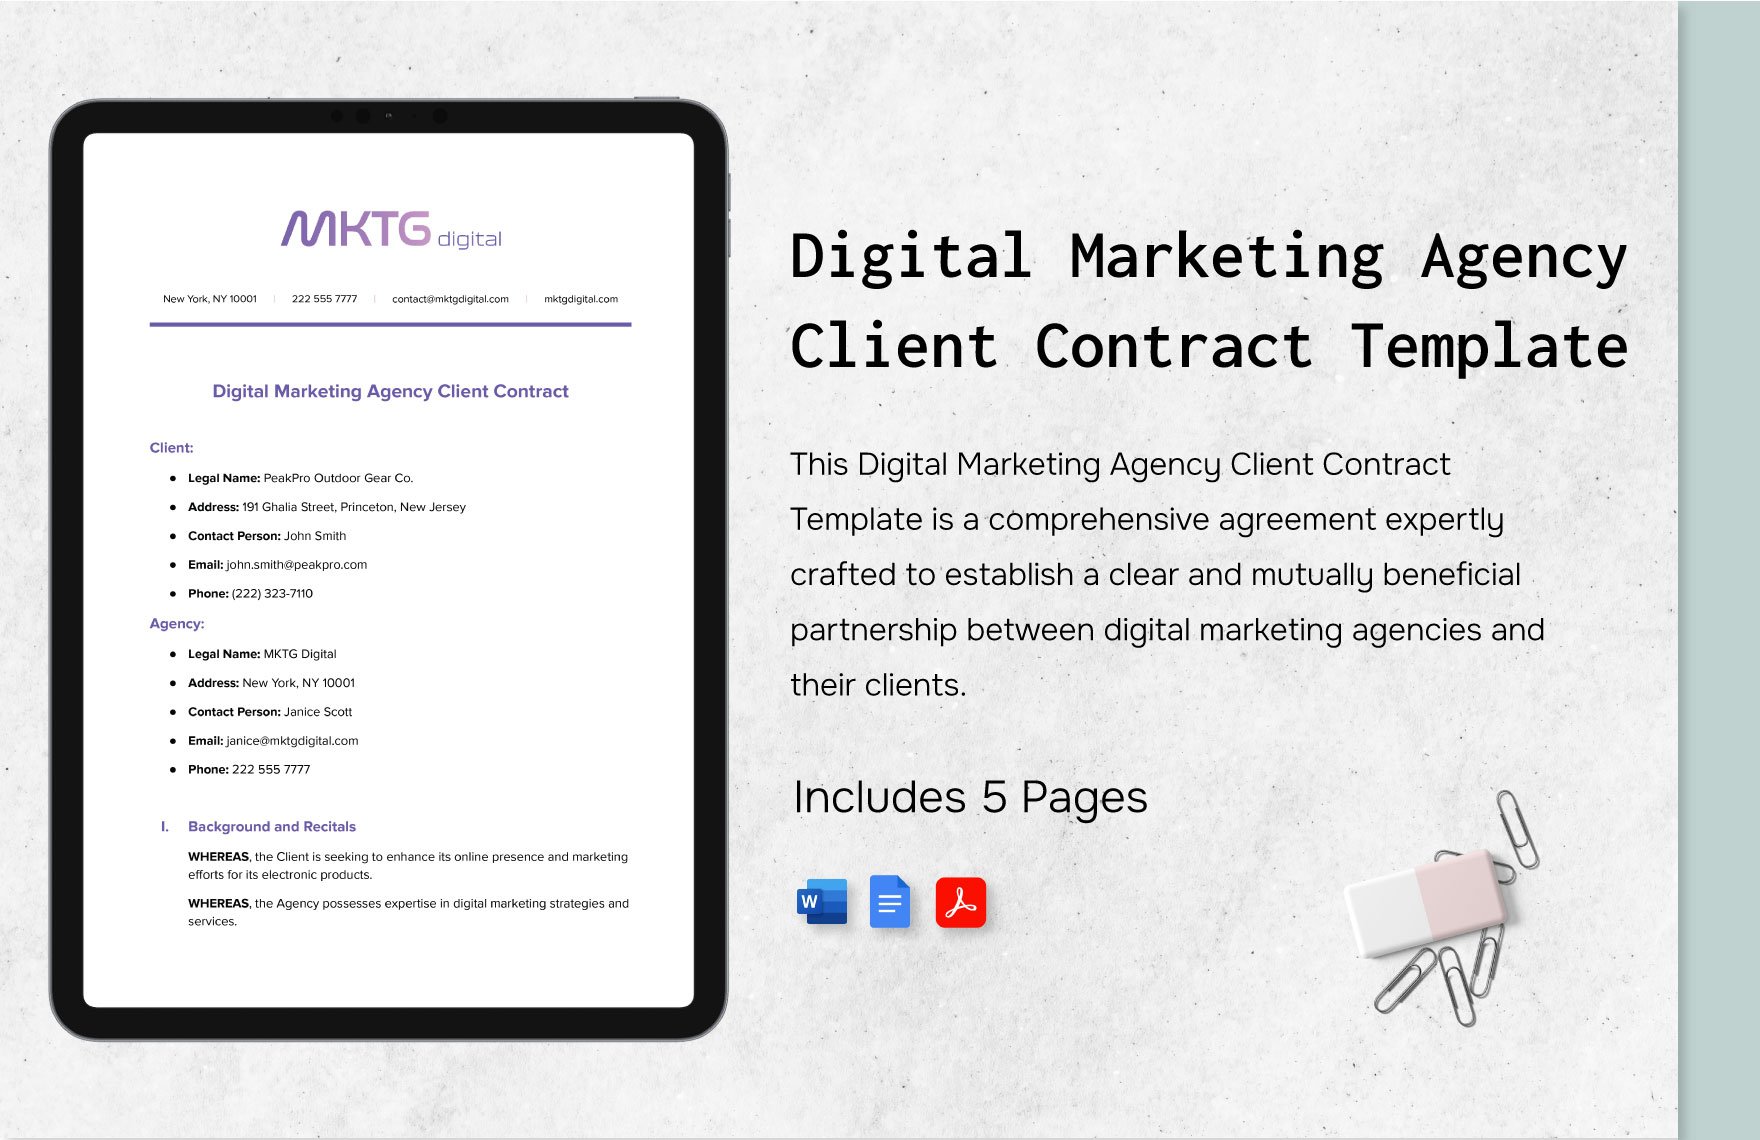 Digital Marketing Agency Client Contract Template